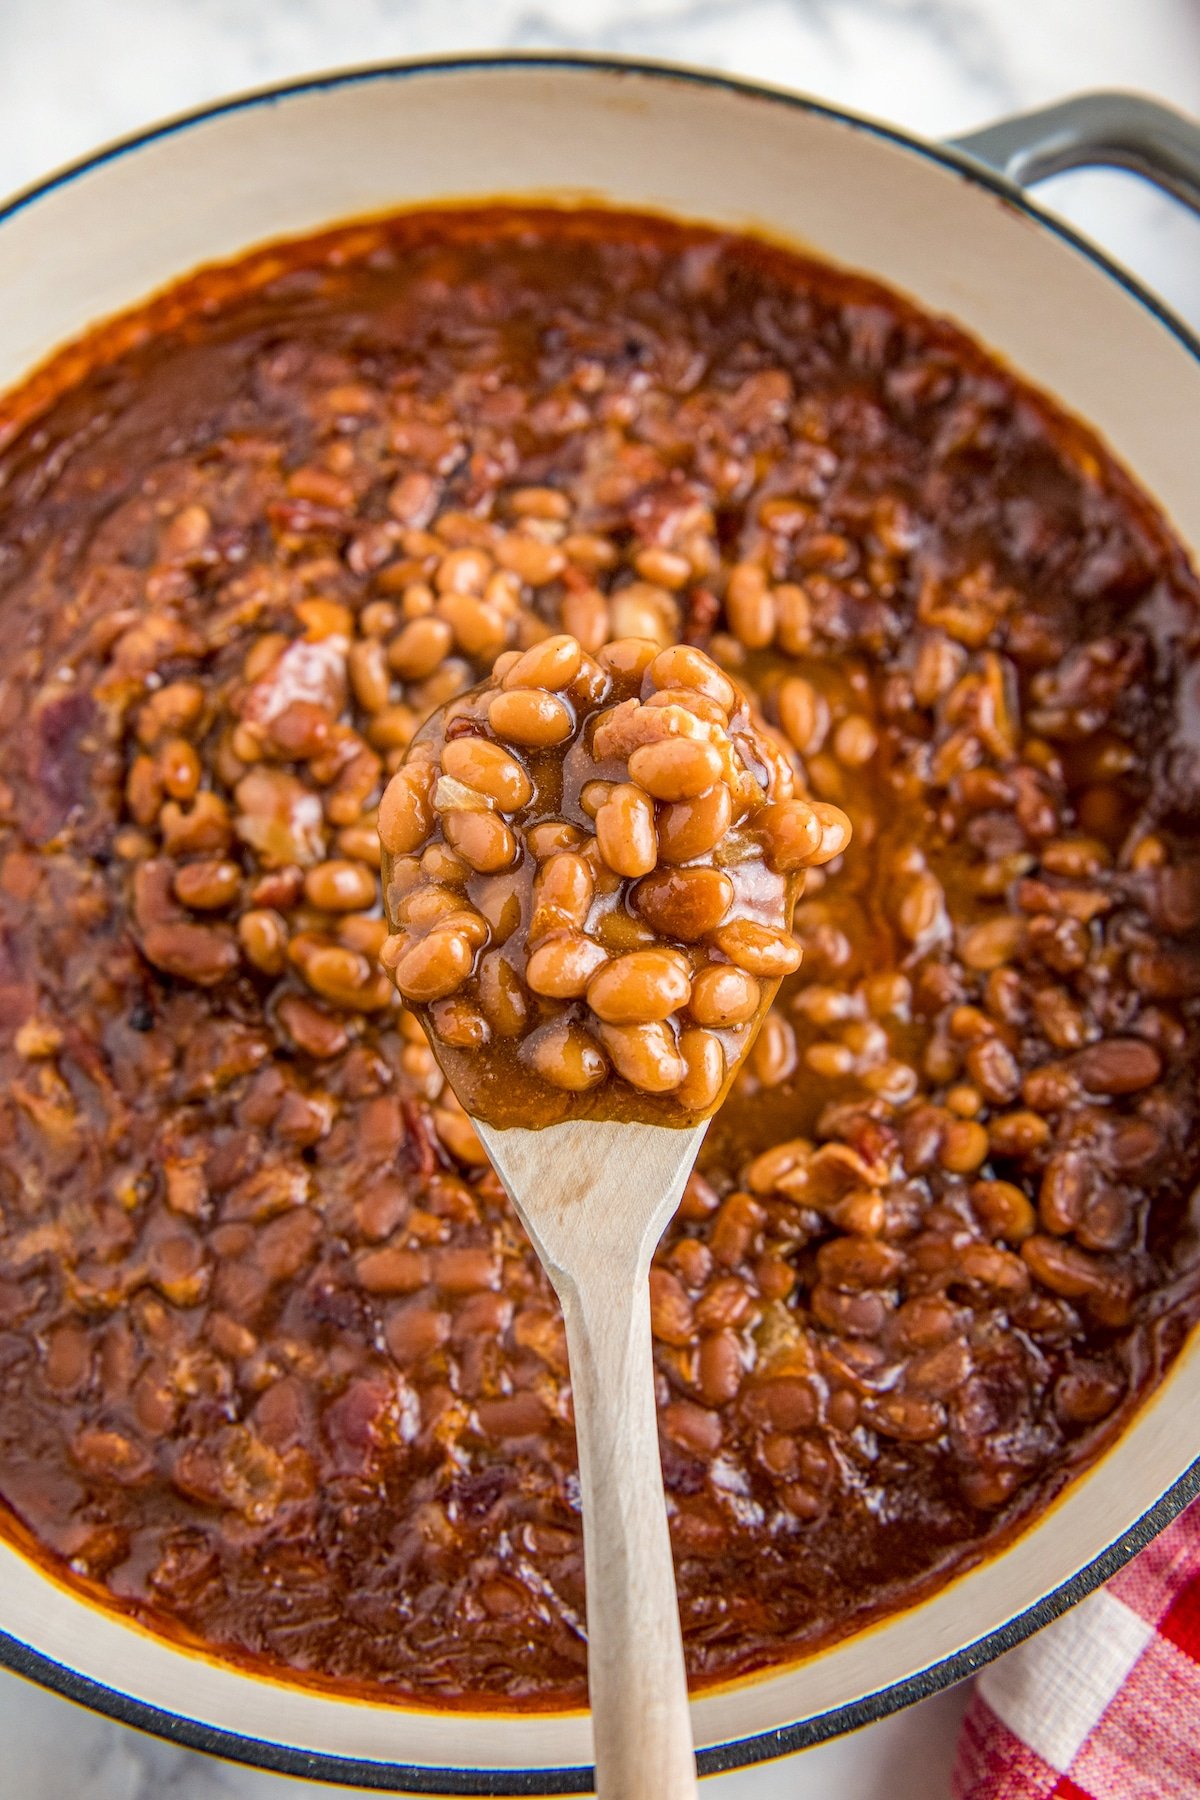 Baked Beans in a skillet with a wooden spoon scooping some up.